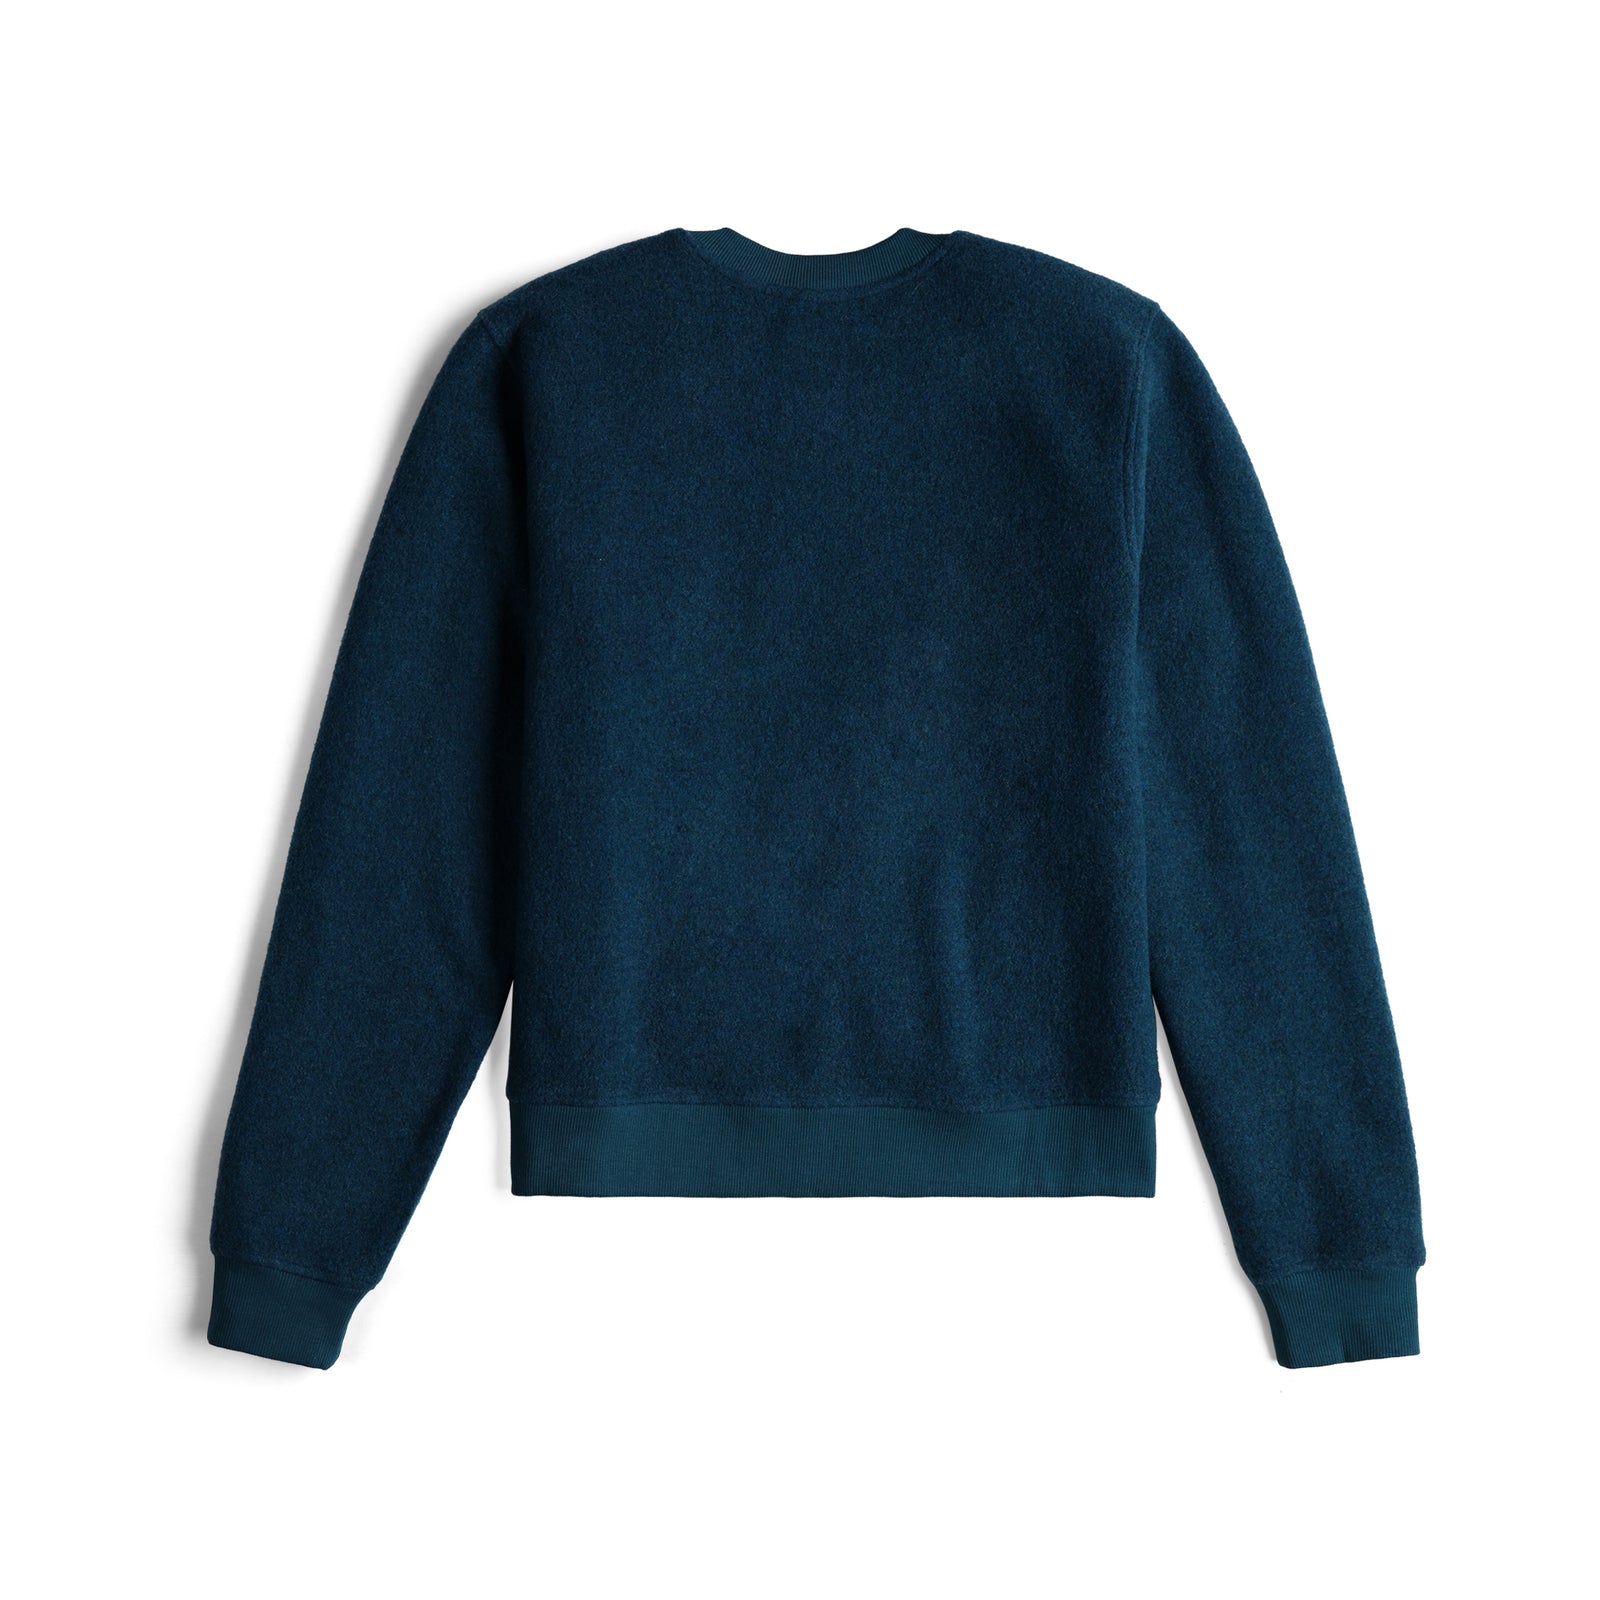 Topo Designs Women's Global Sweater recycled Italian wool crewneck pullover in "pond blue"